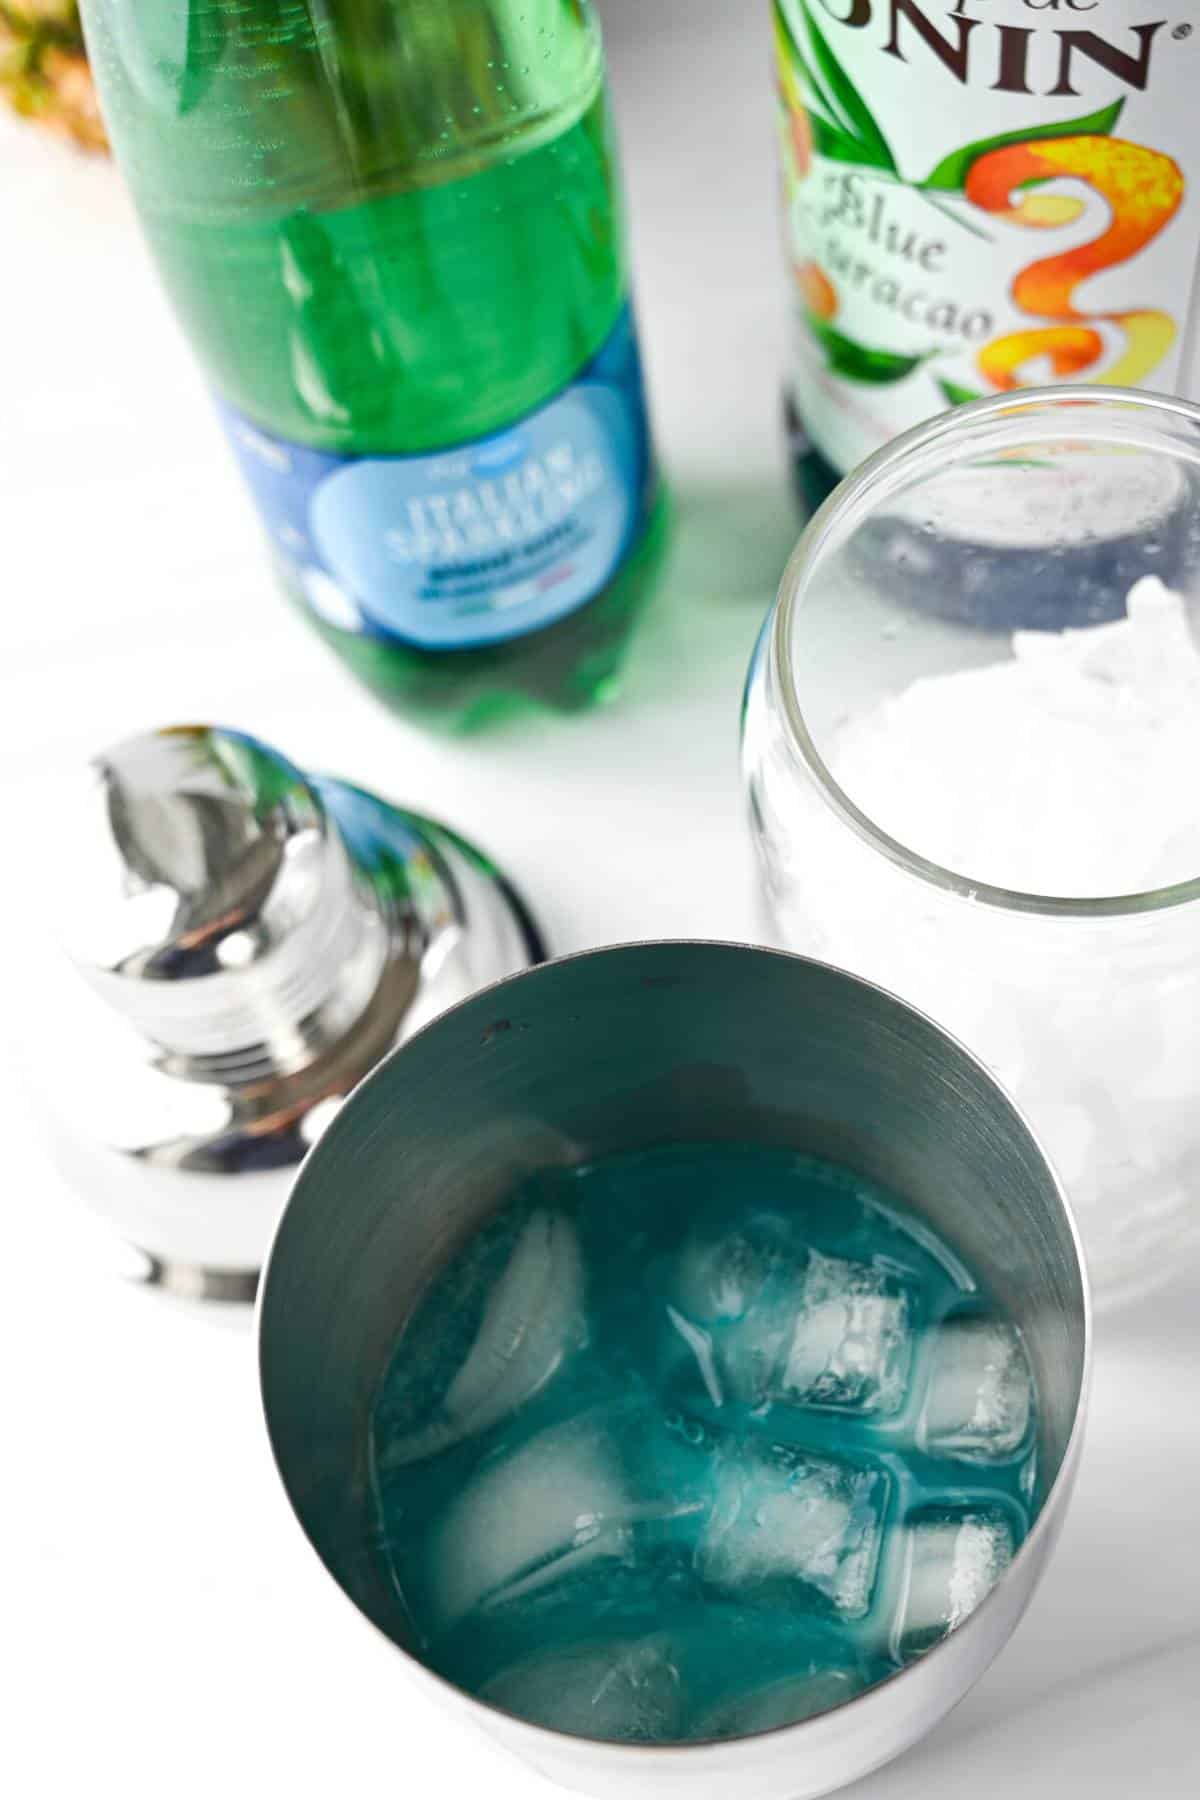 blue curacao syrup mixed with lemonade and ice in a cocktail shaker with ice